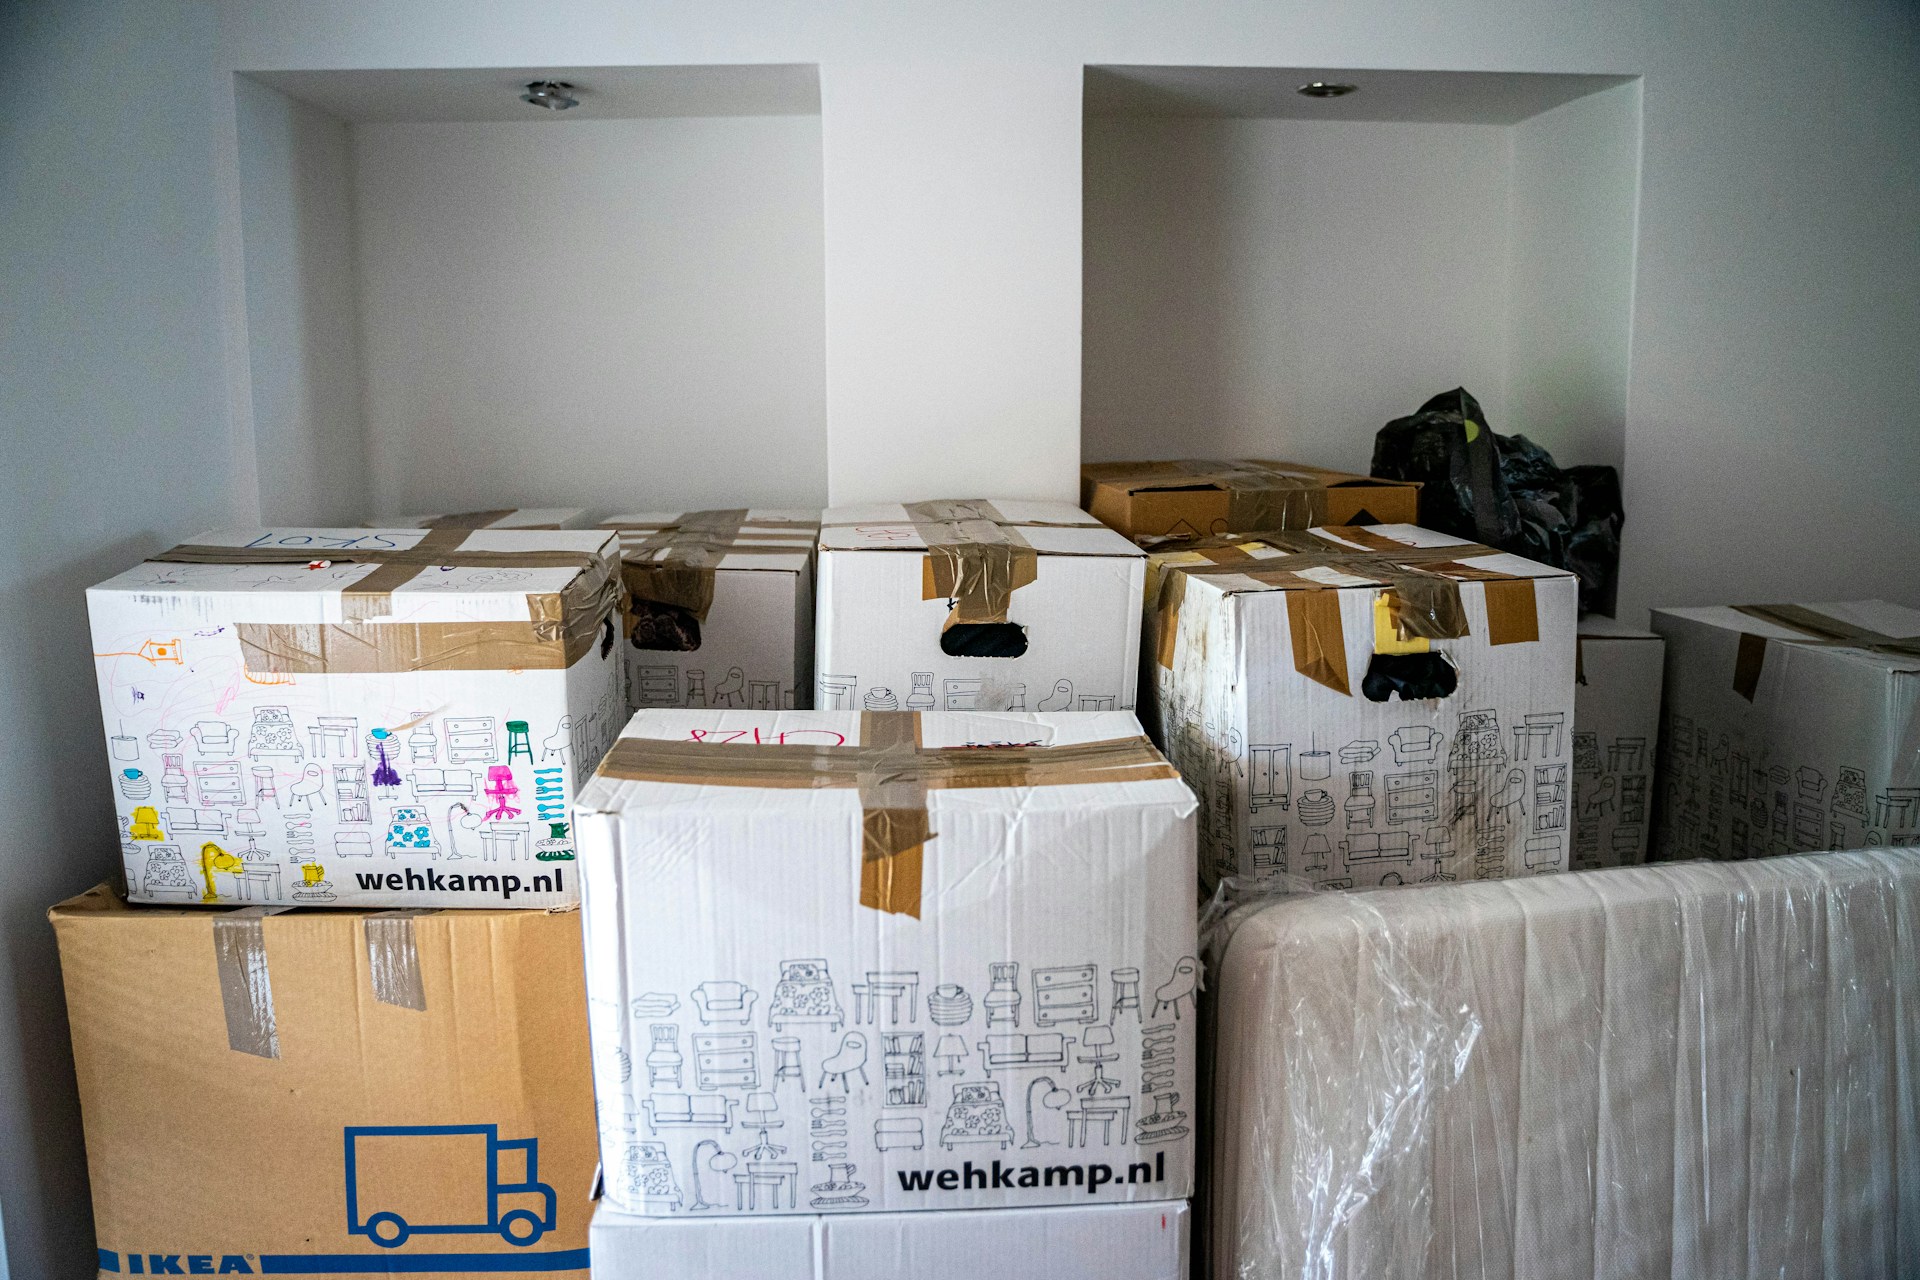 Multiple boxes in a room